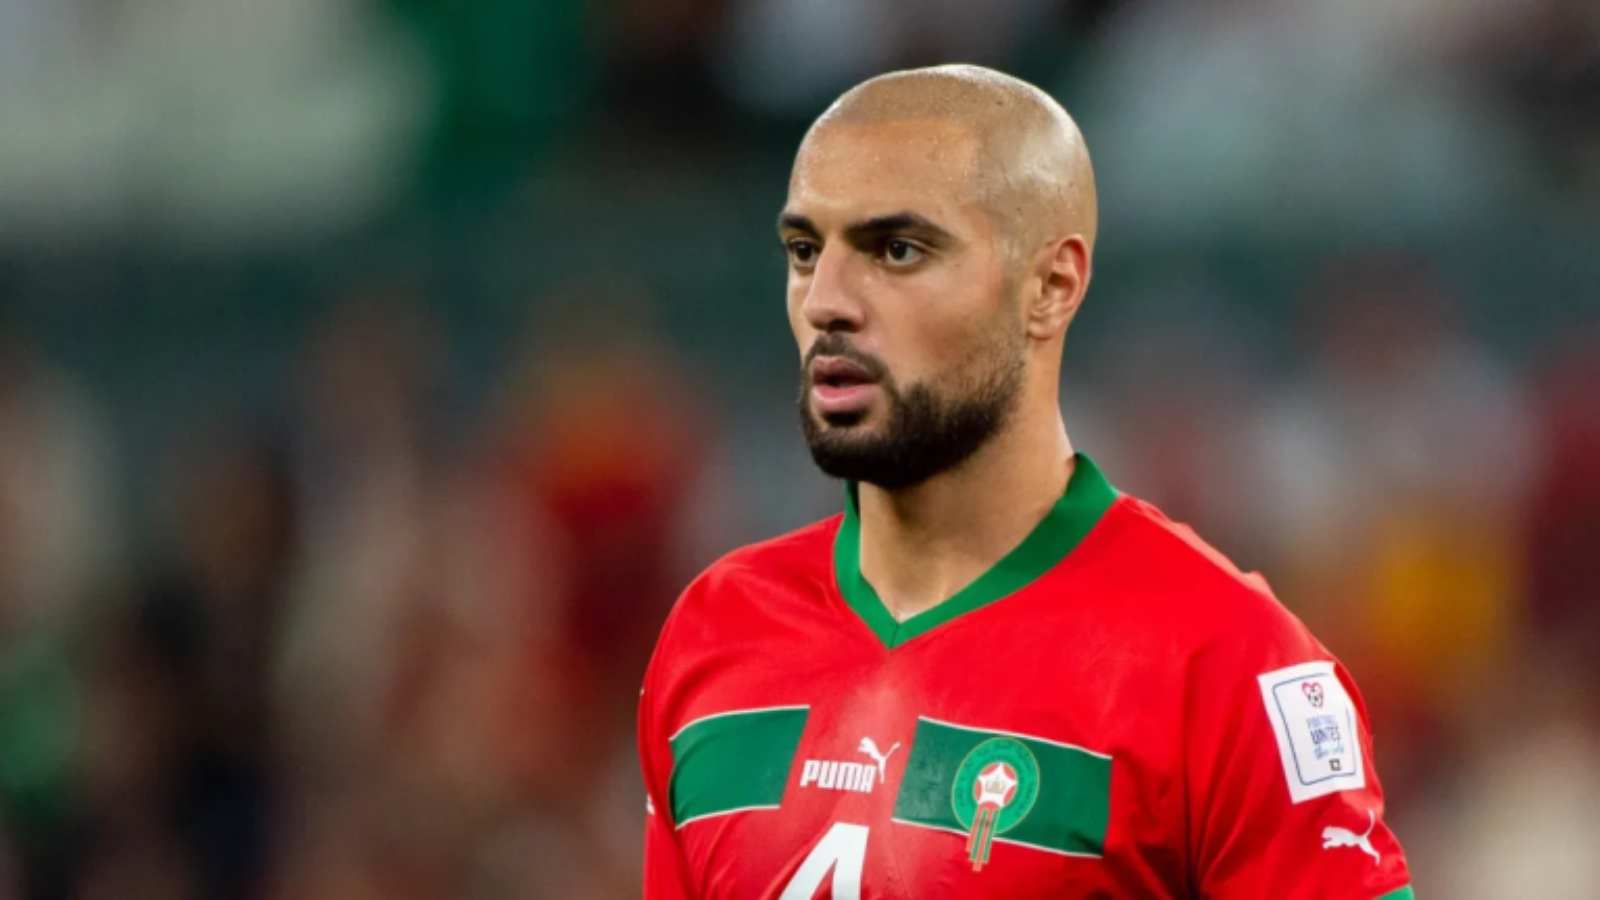 Sofyan Amrabat Biography: Age, Height, Career, Personal Life, Net Worth, and More